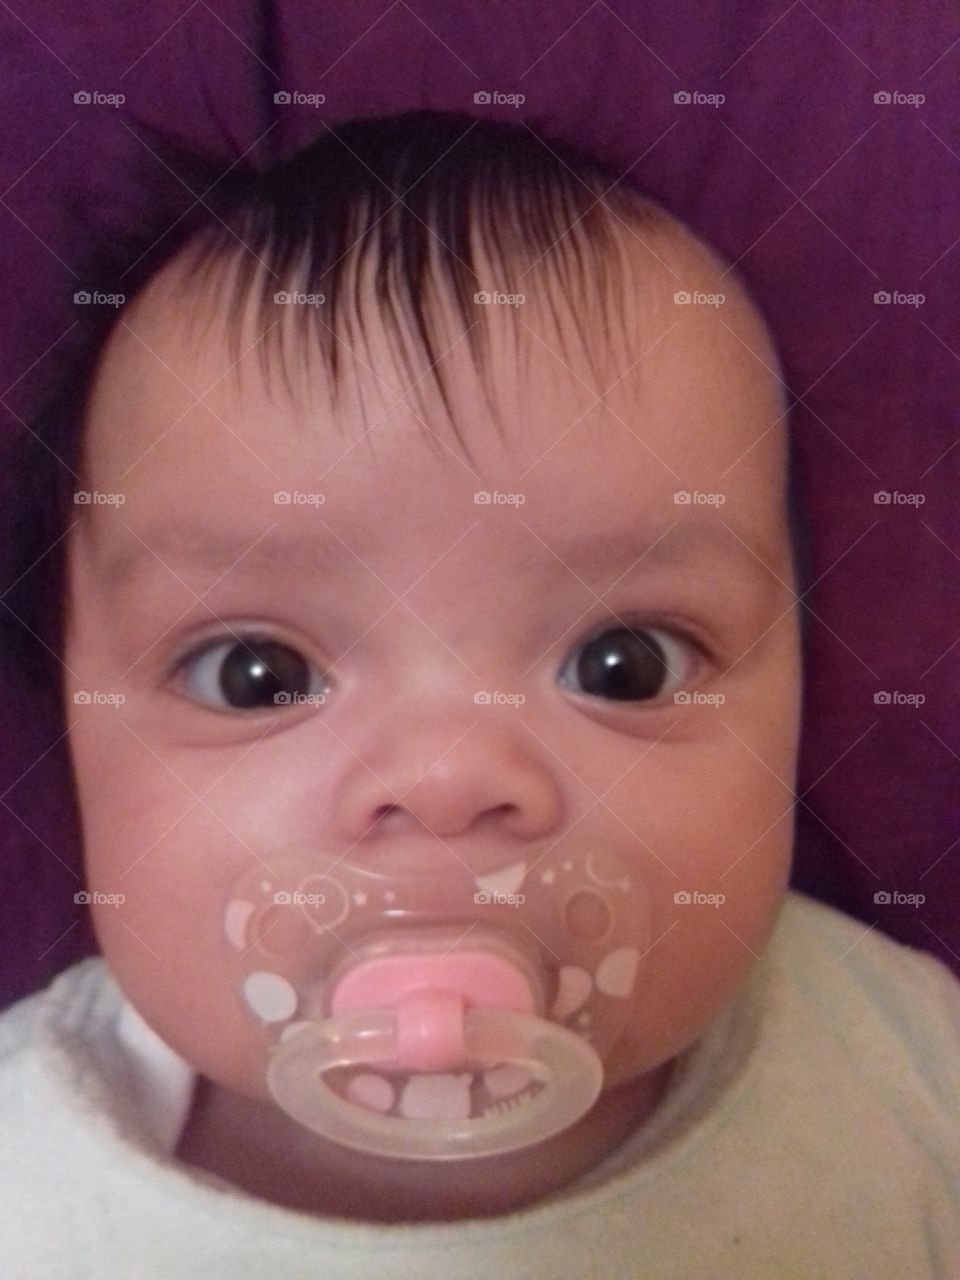 take her pacifier, she is 3 months old